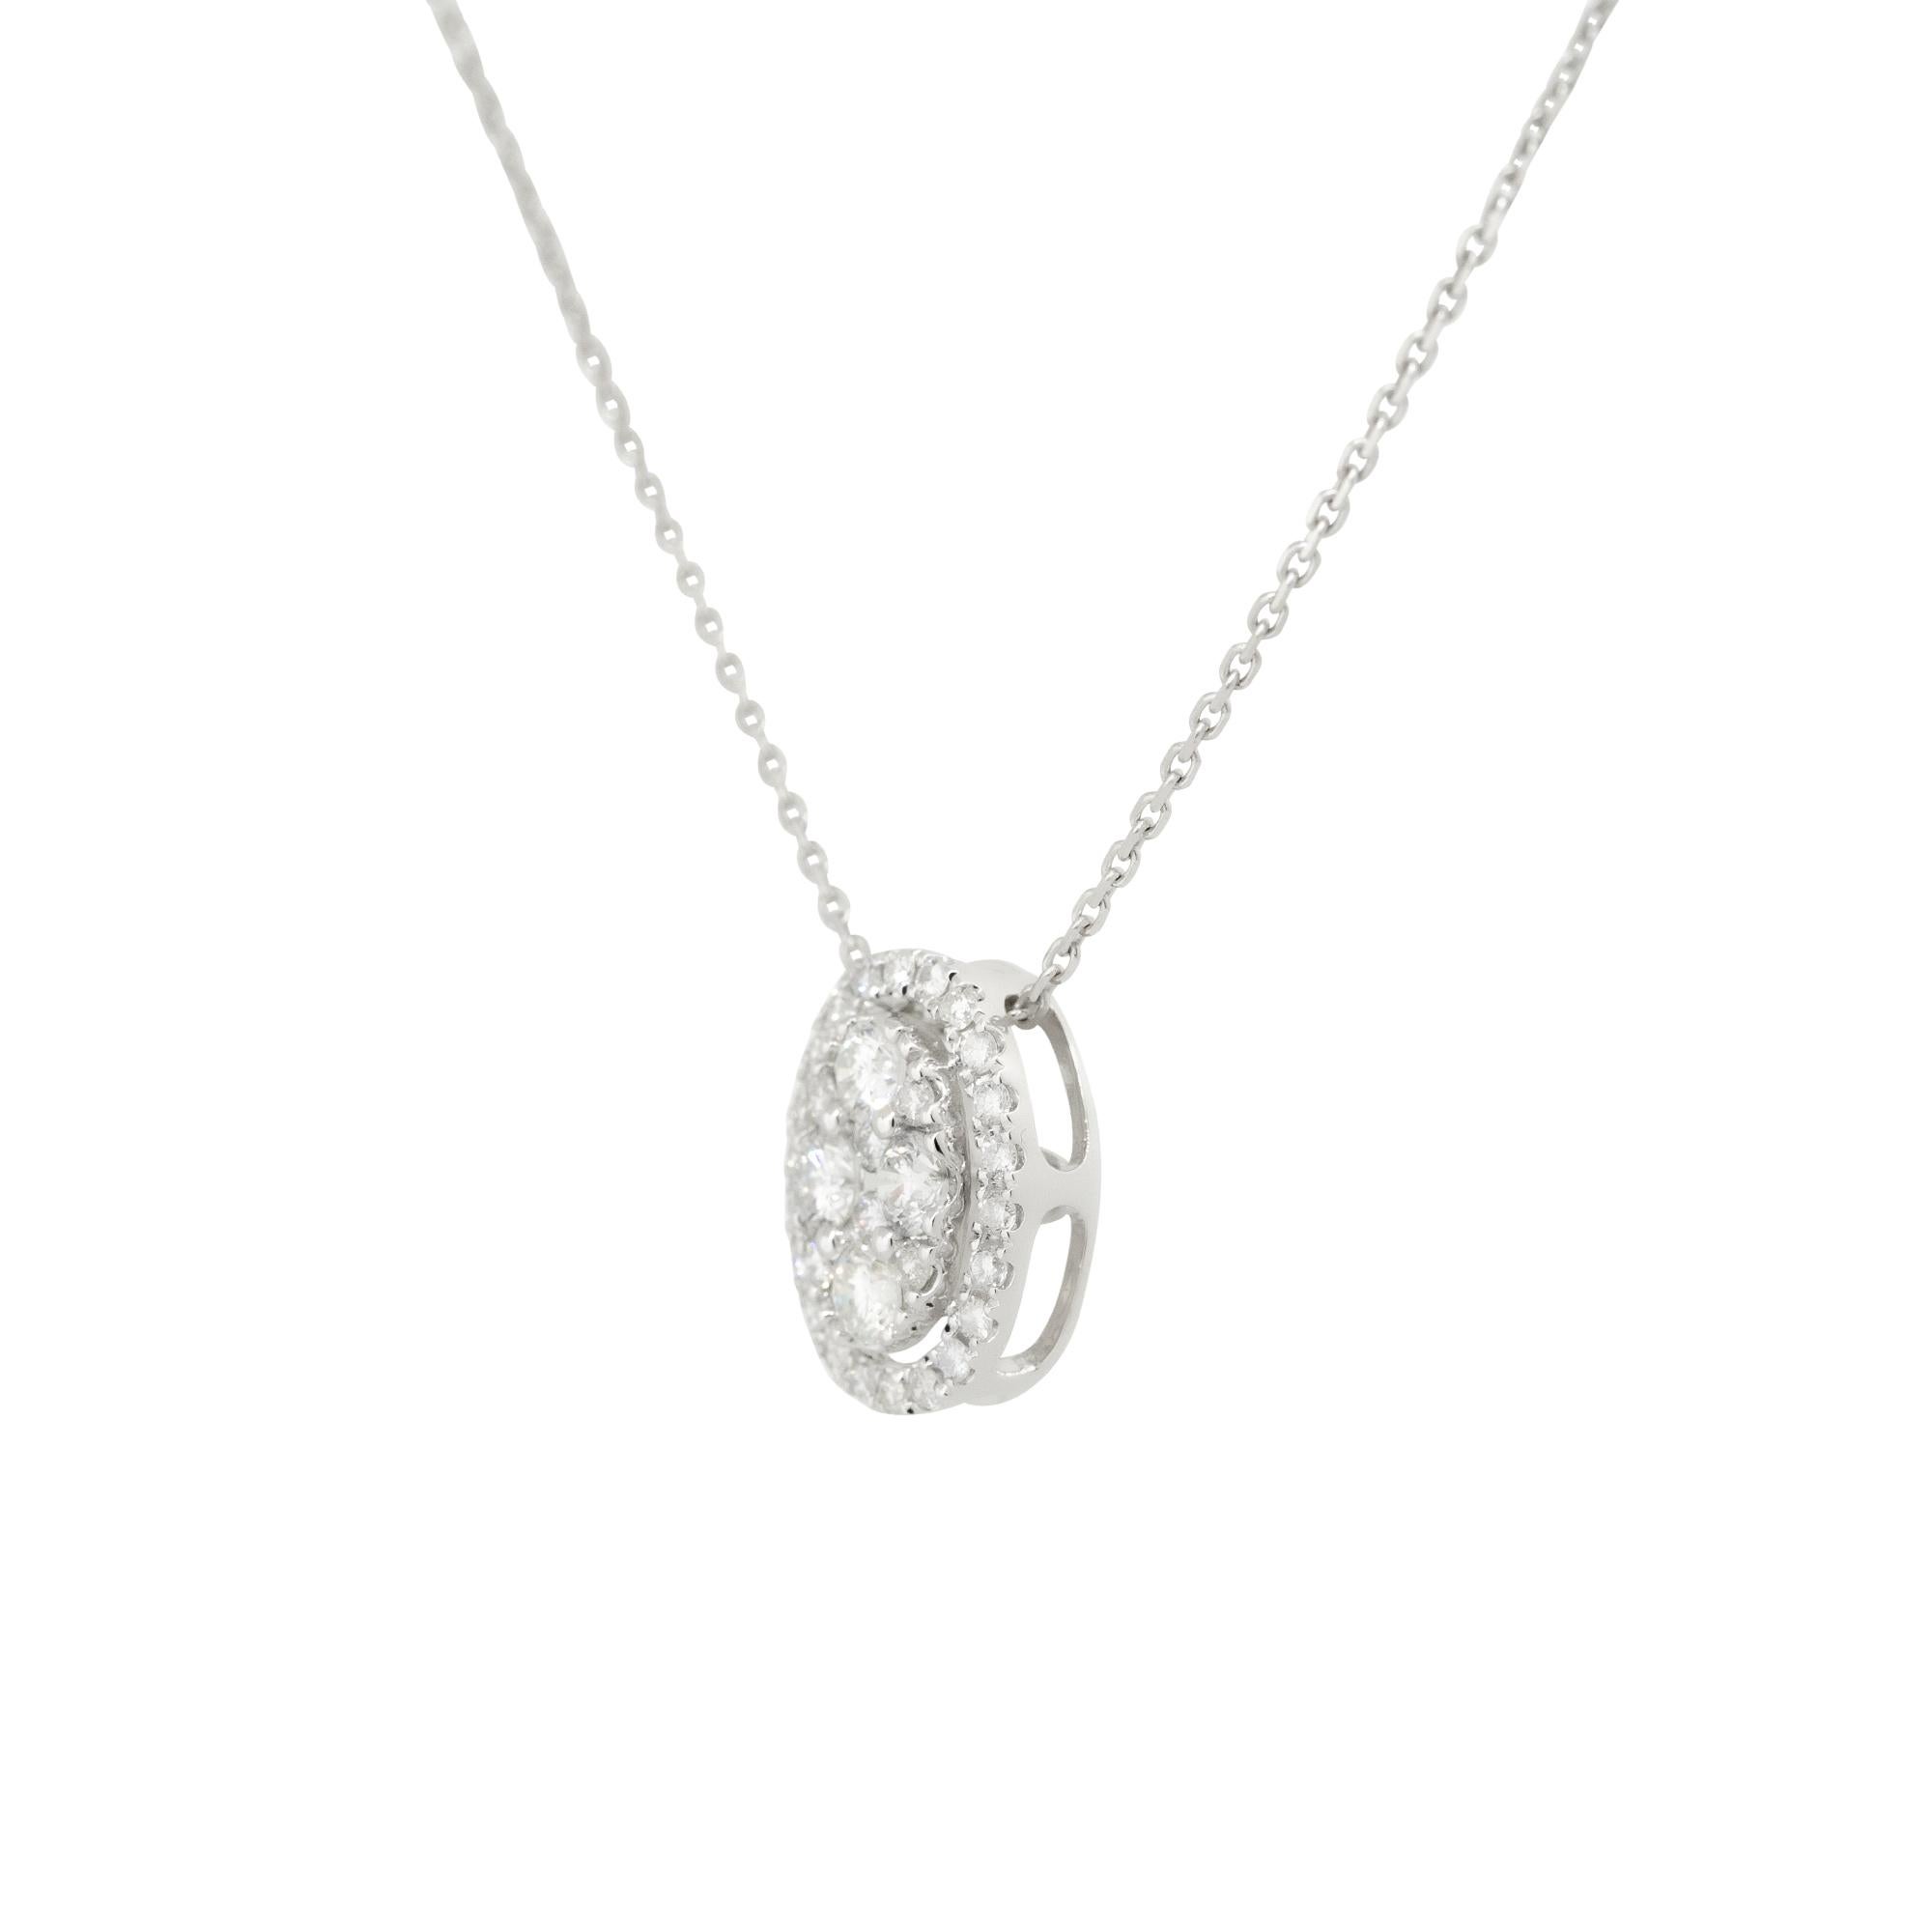 Round Cut 0.85 Carat Pave Diamond Oval Shaped Pendant Necklace 18 Karat in Stock For Sale